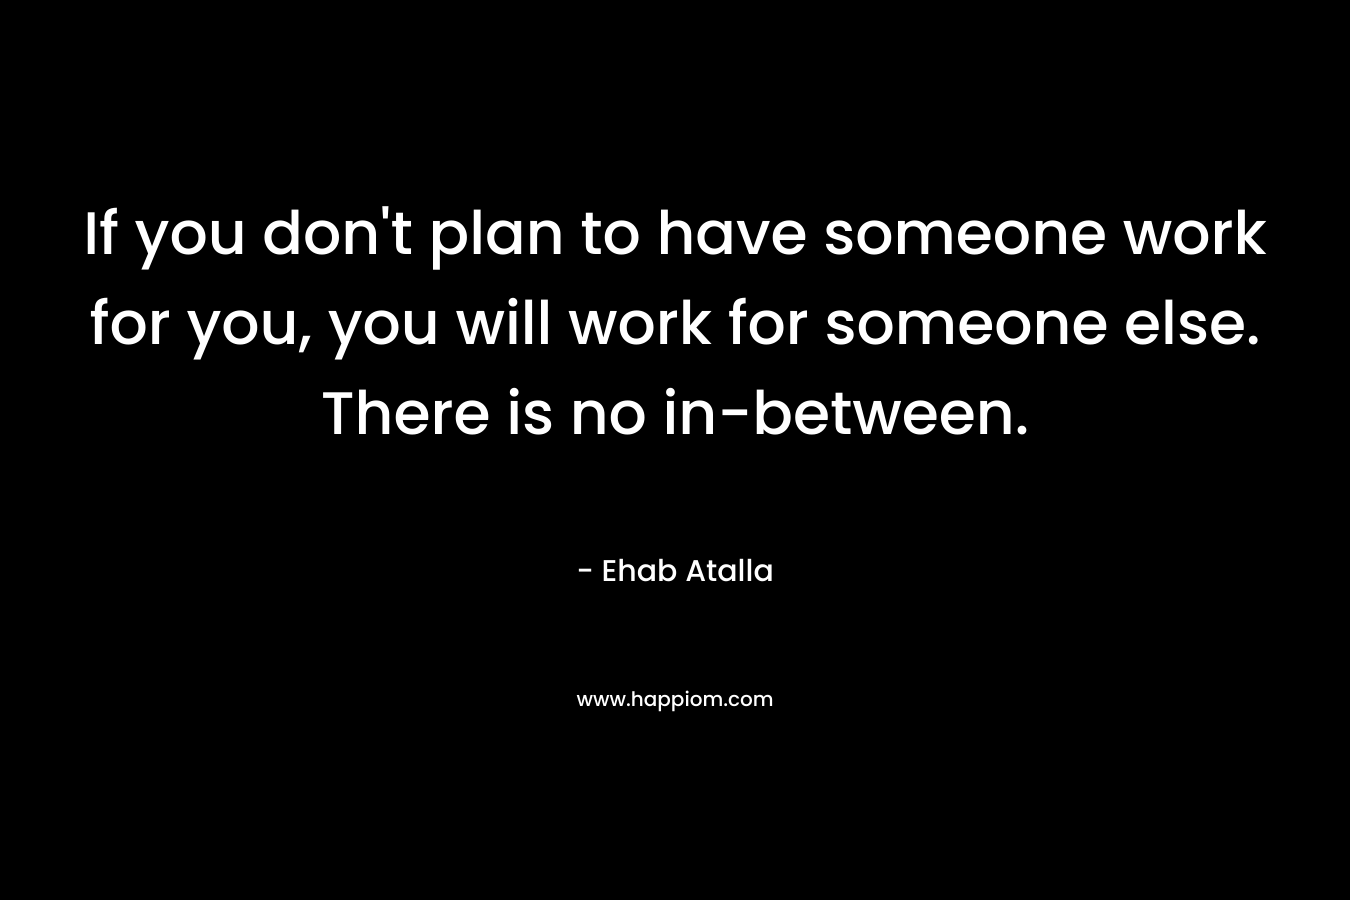 If you don’t plan to have someone work for you, you will work for someone else. There is no in-between. – Ehab Atalla